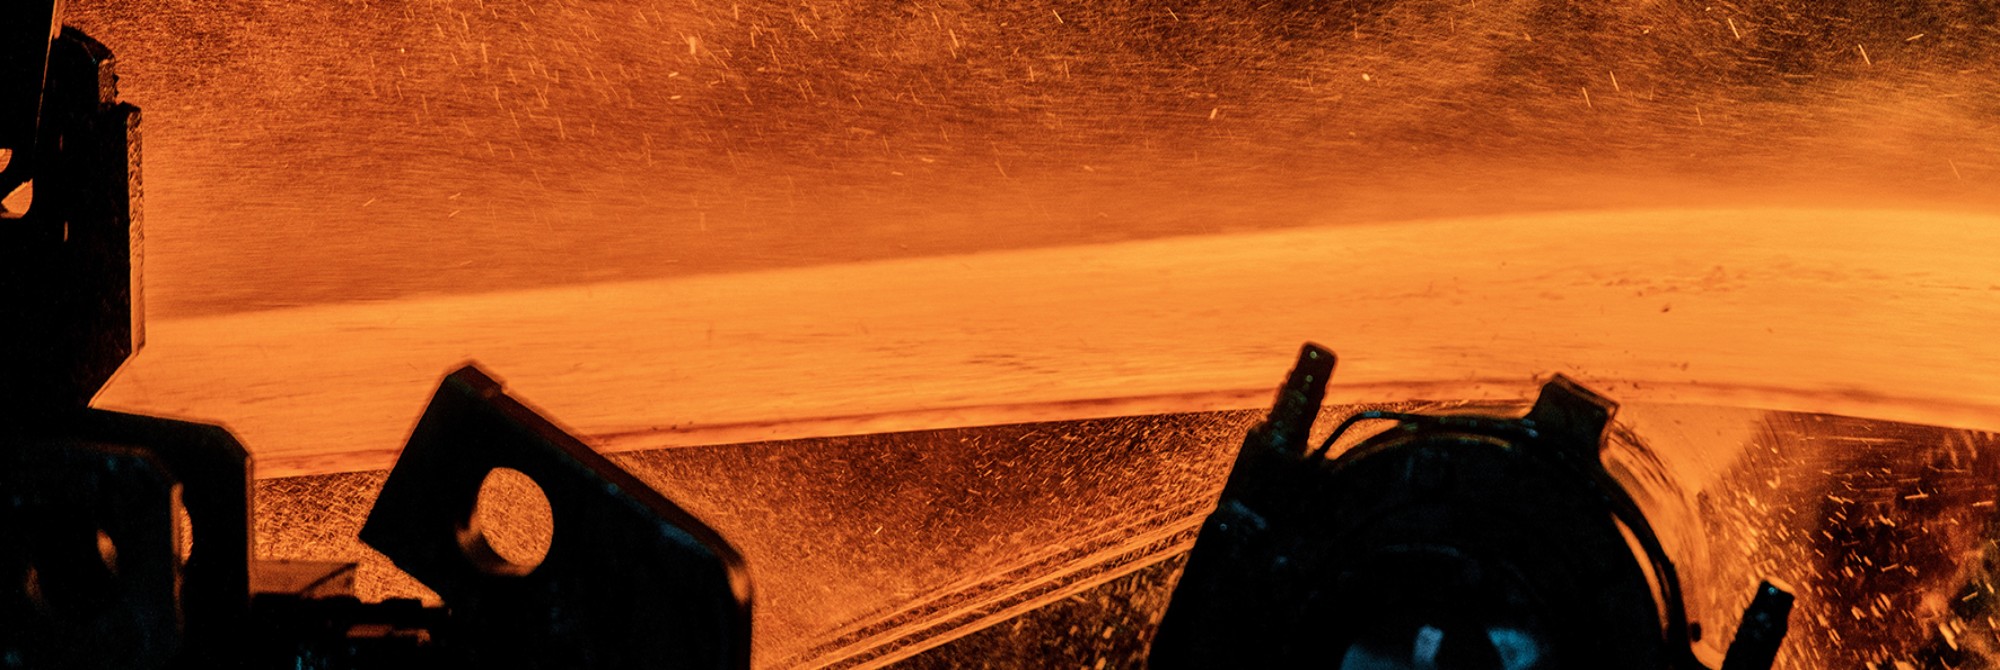 Hot strip products from thyssenkrupp Steel